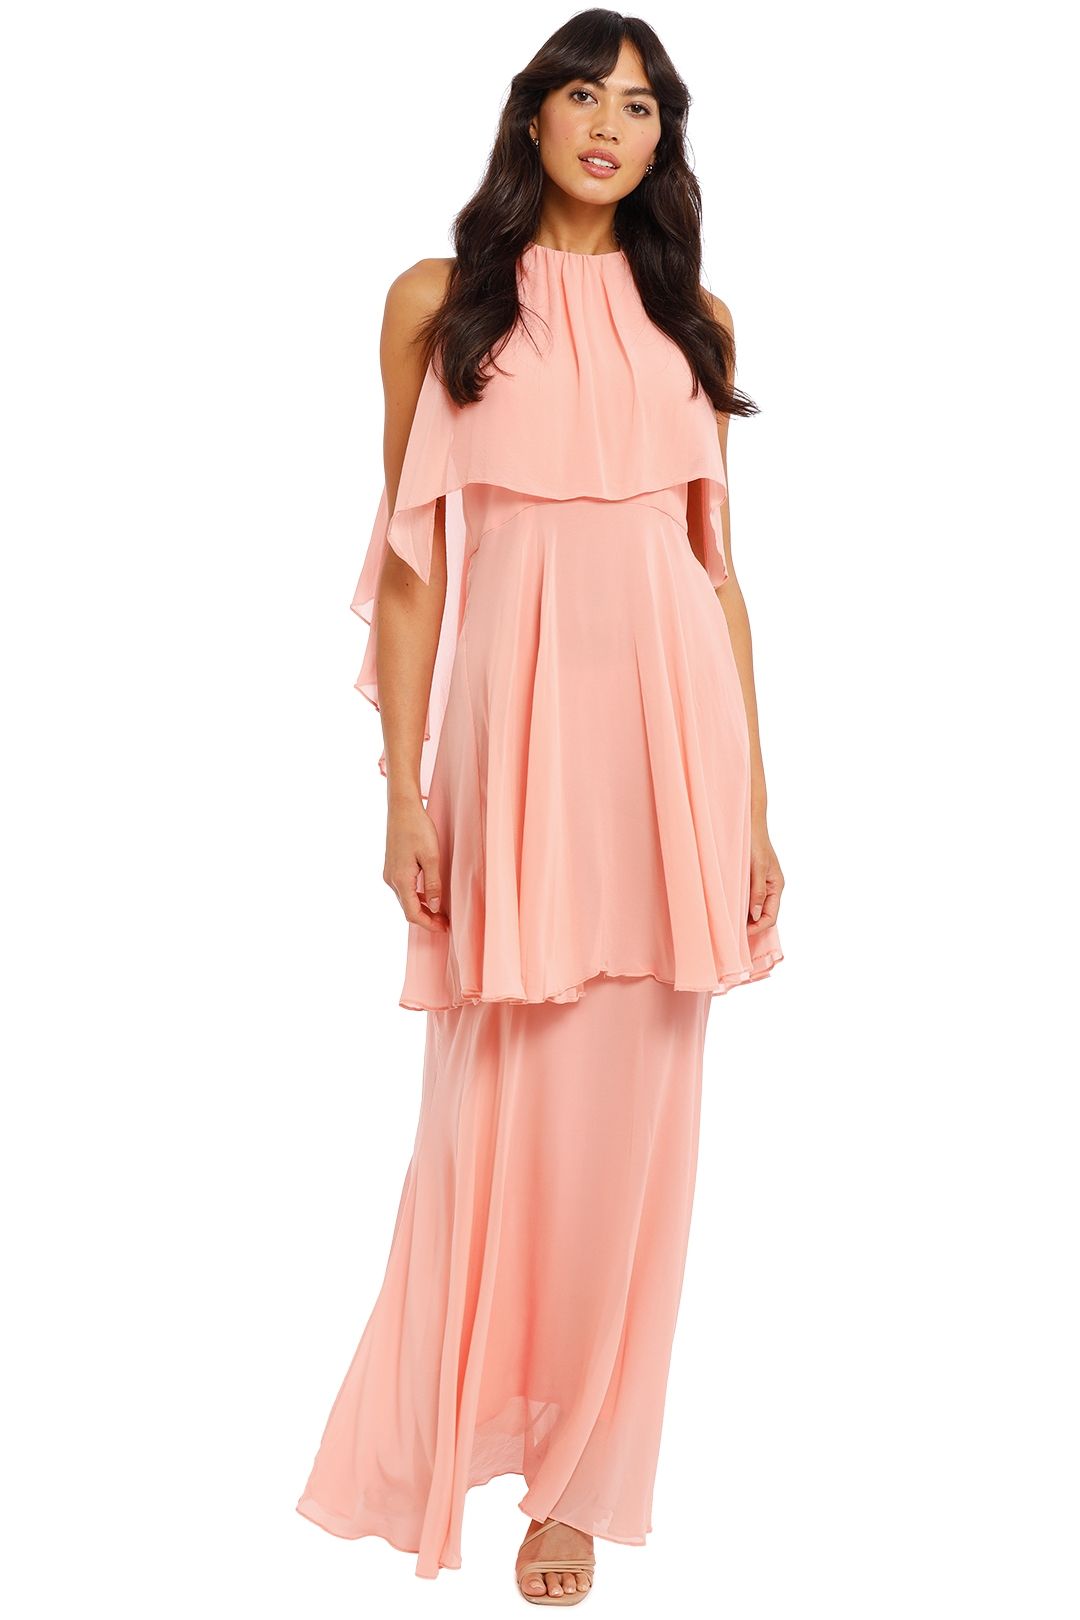 Ginger and Smart Dream Gown Sherbert Pink Tiered Skirt